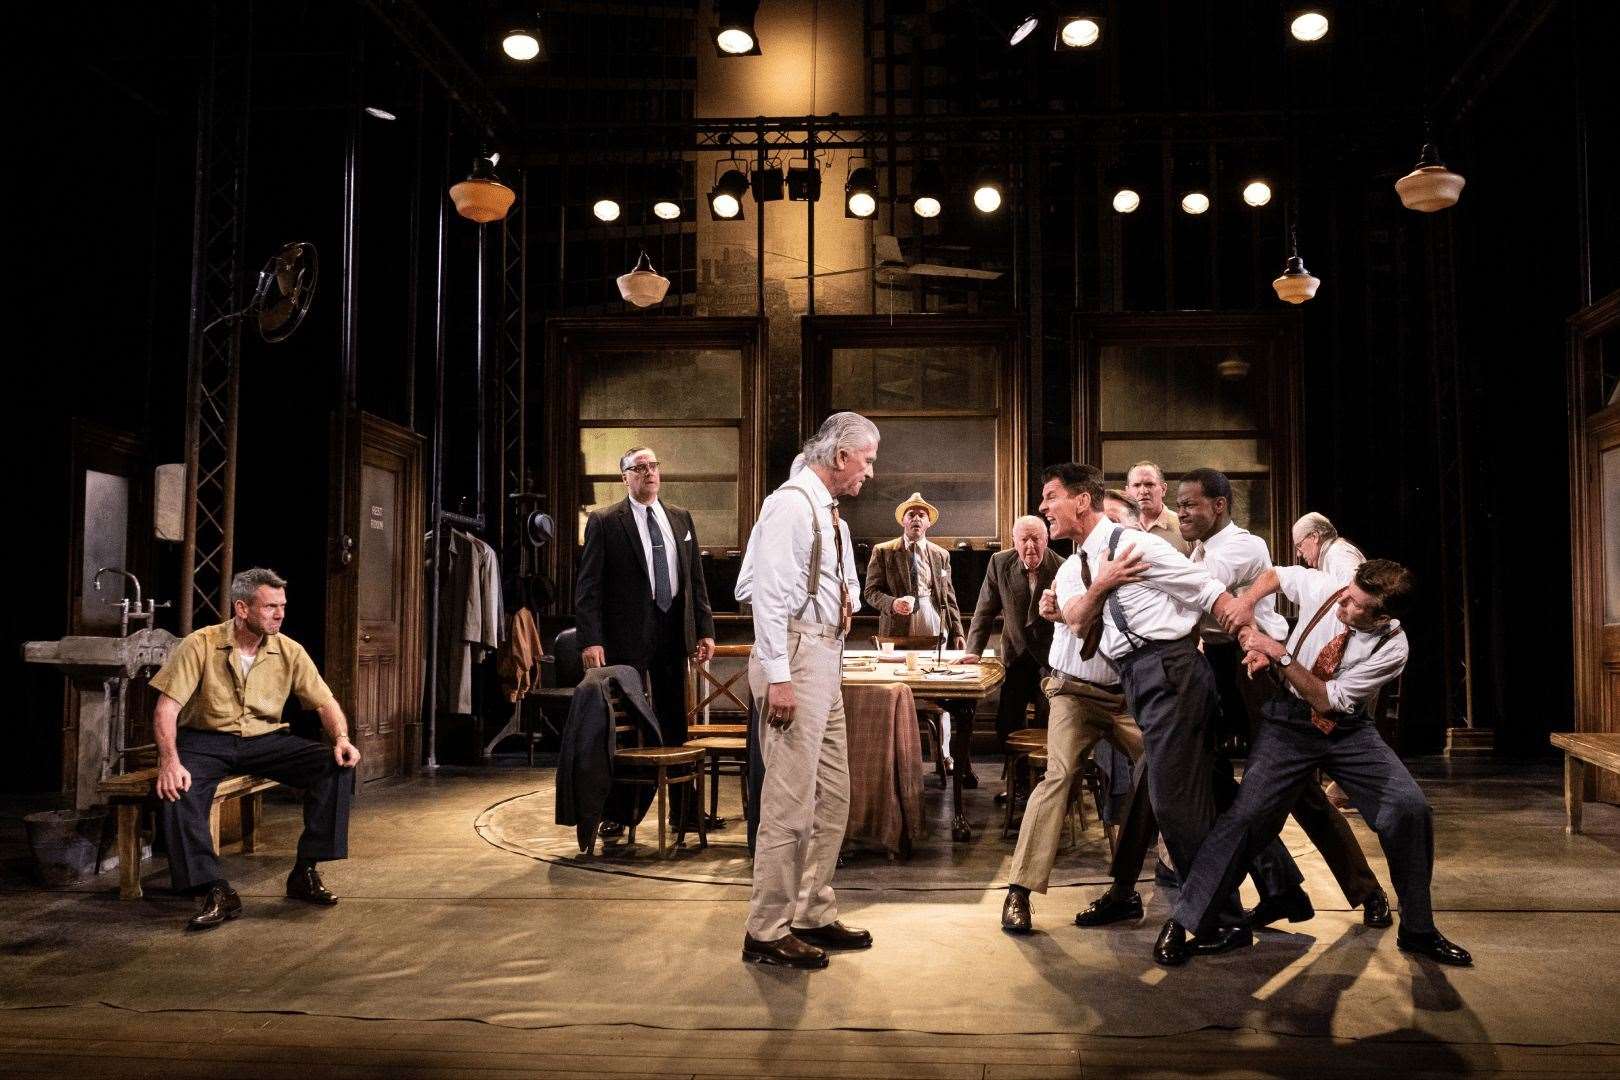 Twelve Angry Men is coming to Canterbury as part of its nationwide tour. Picture: Jack Merriman